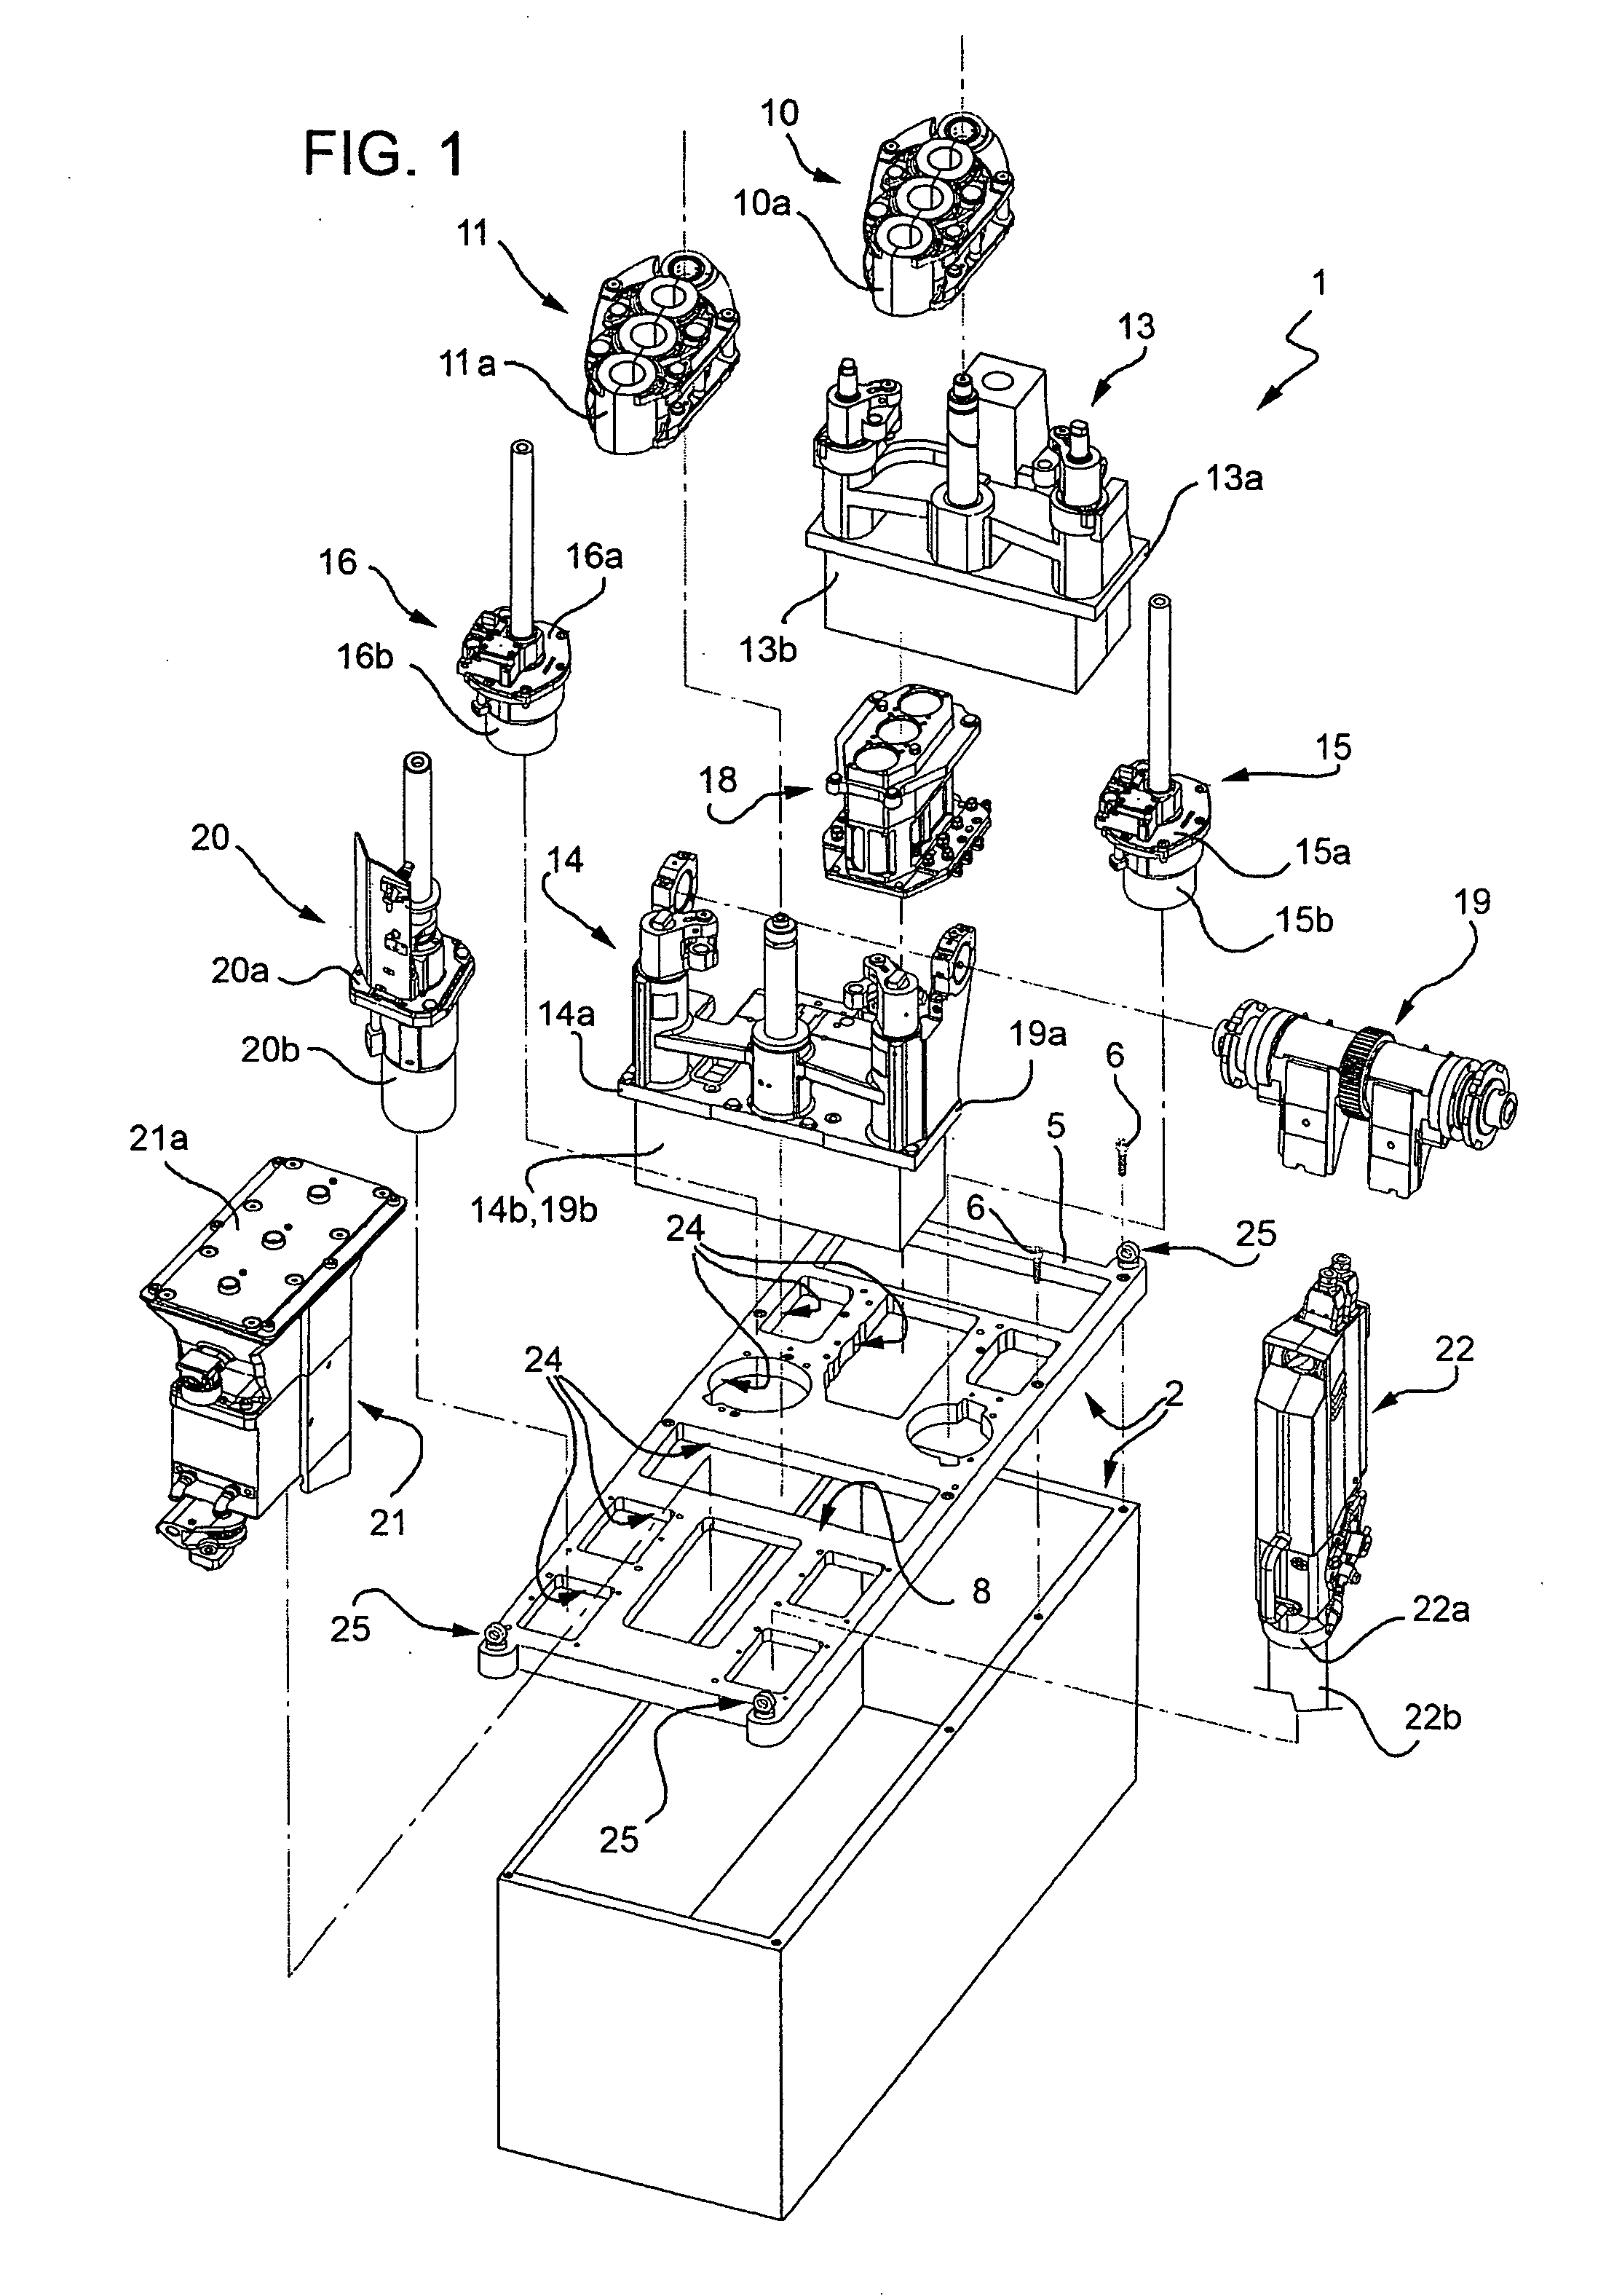 Forming section of a hollow glass items production machine and relevant support structure